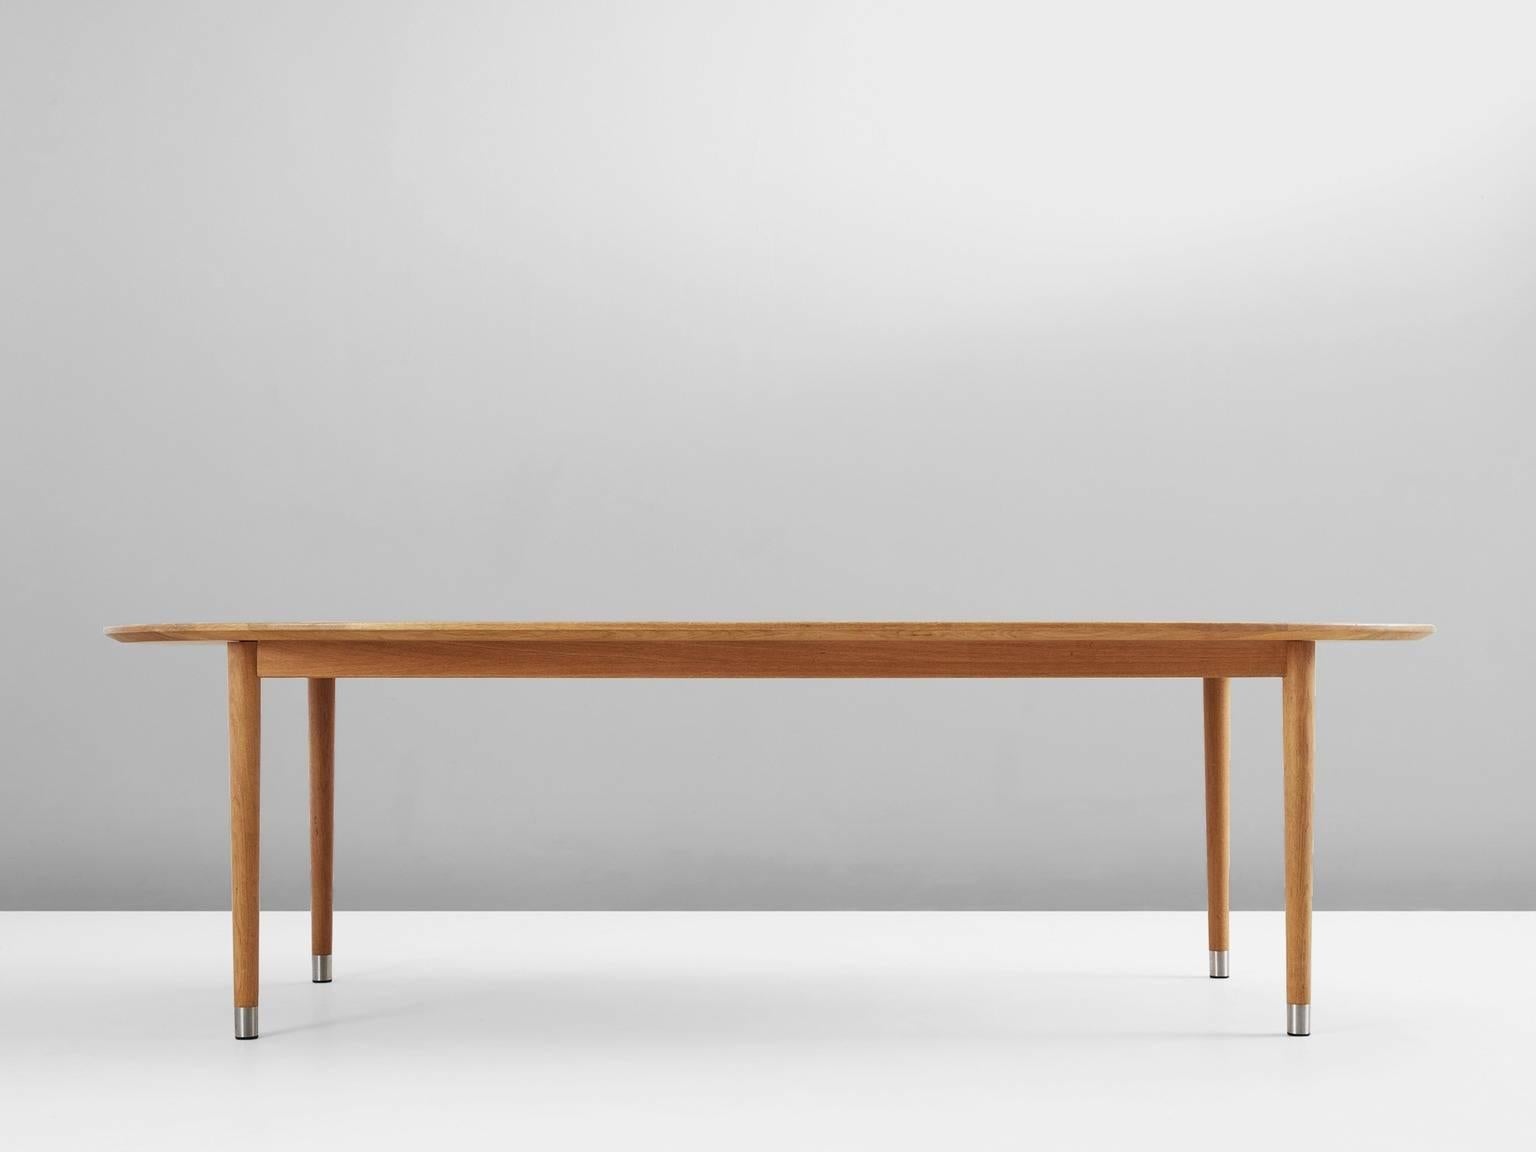 Dining table, in oak and metal, Scandinavia, 1970s.

Large oval dining table in oak. This table has a simplistic design. Due the cylindrical legs and oval shaped top, this design gets more elegance. The metal 'socks' in silver color on the table's